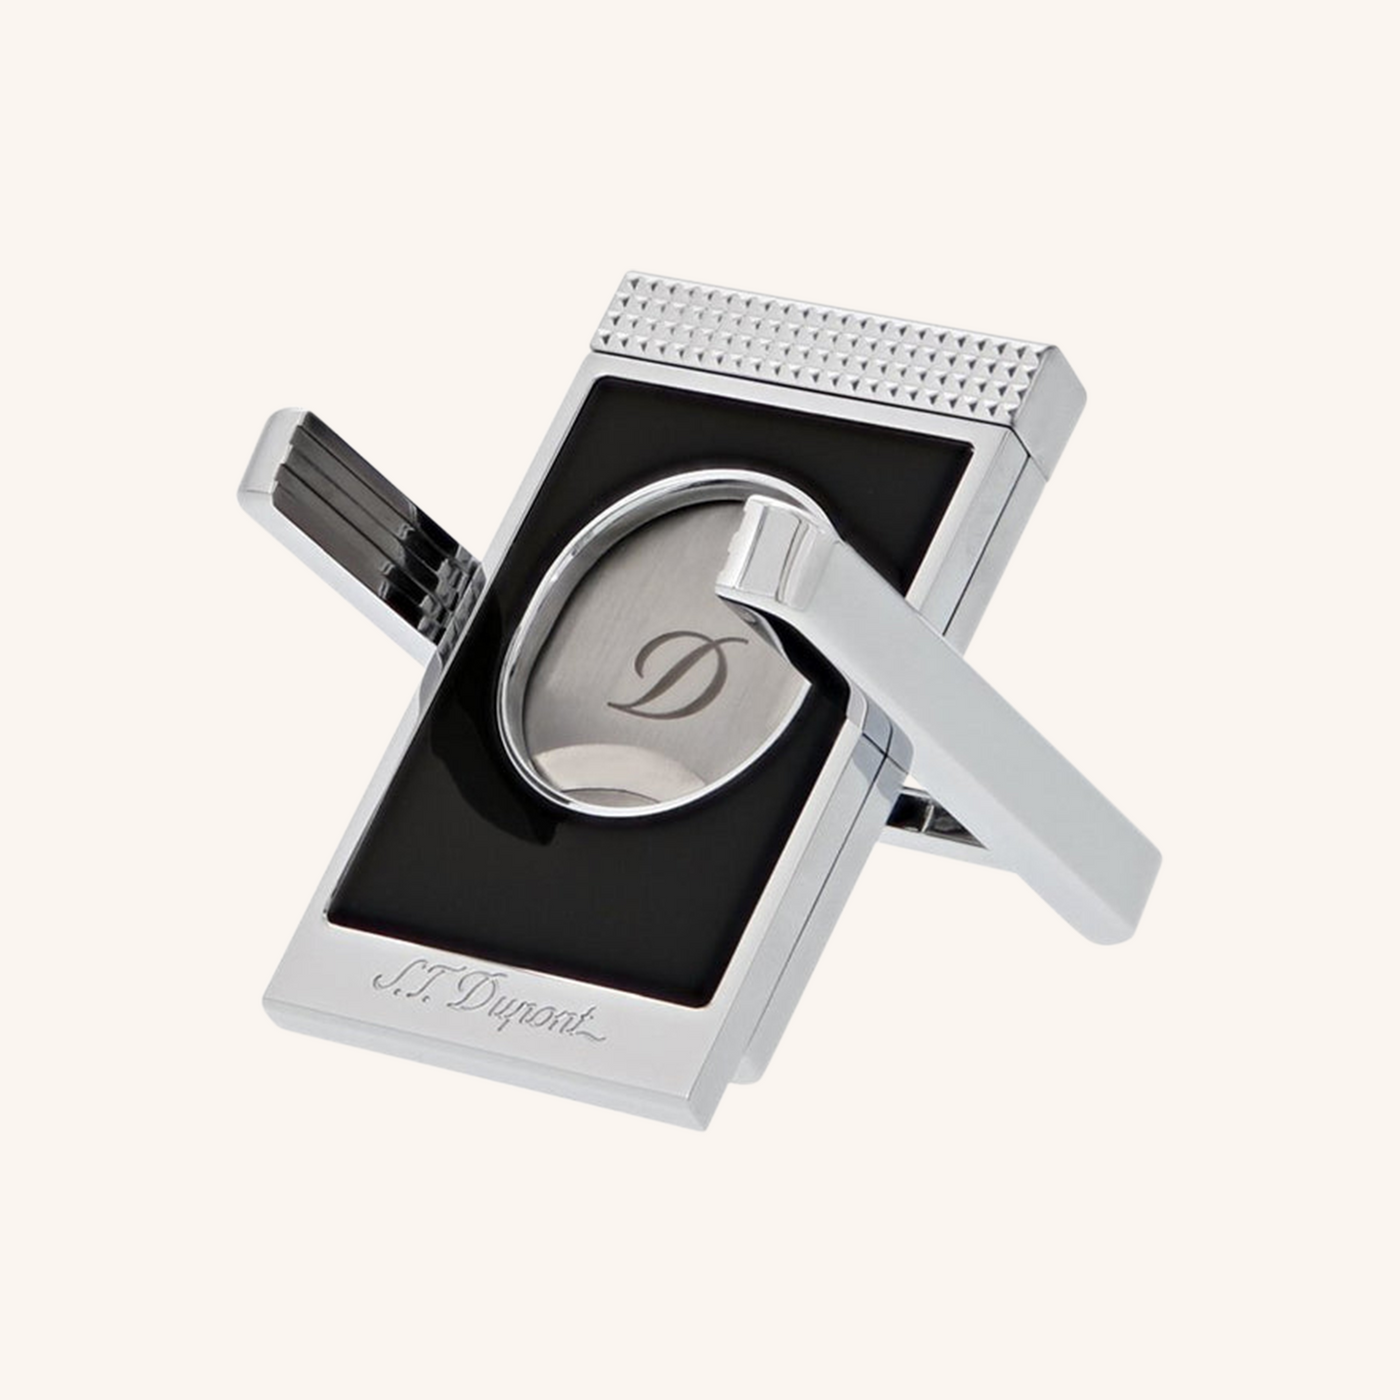 S.T. Dupont Cigar Cutter and Stand Black Chrome